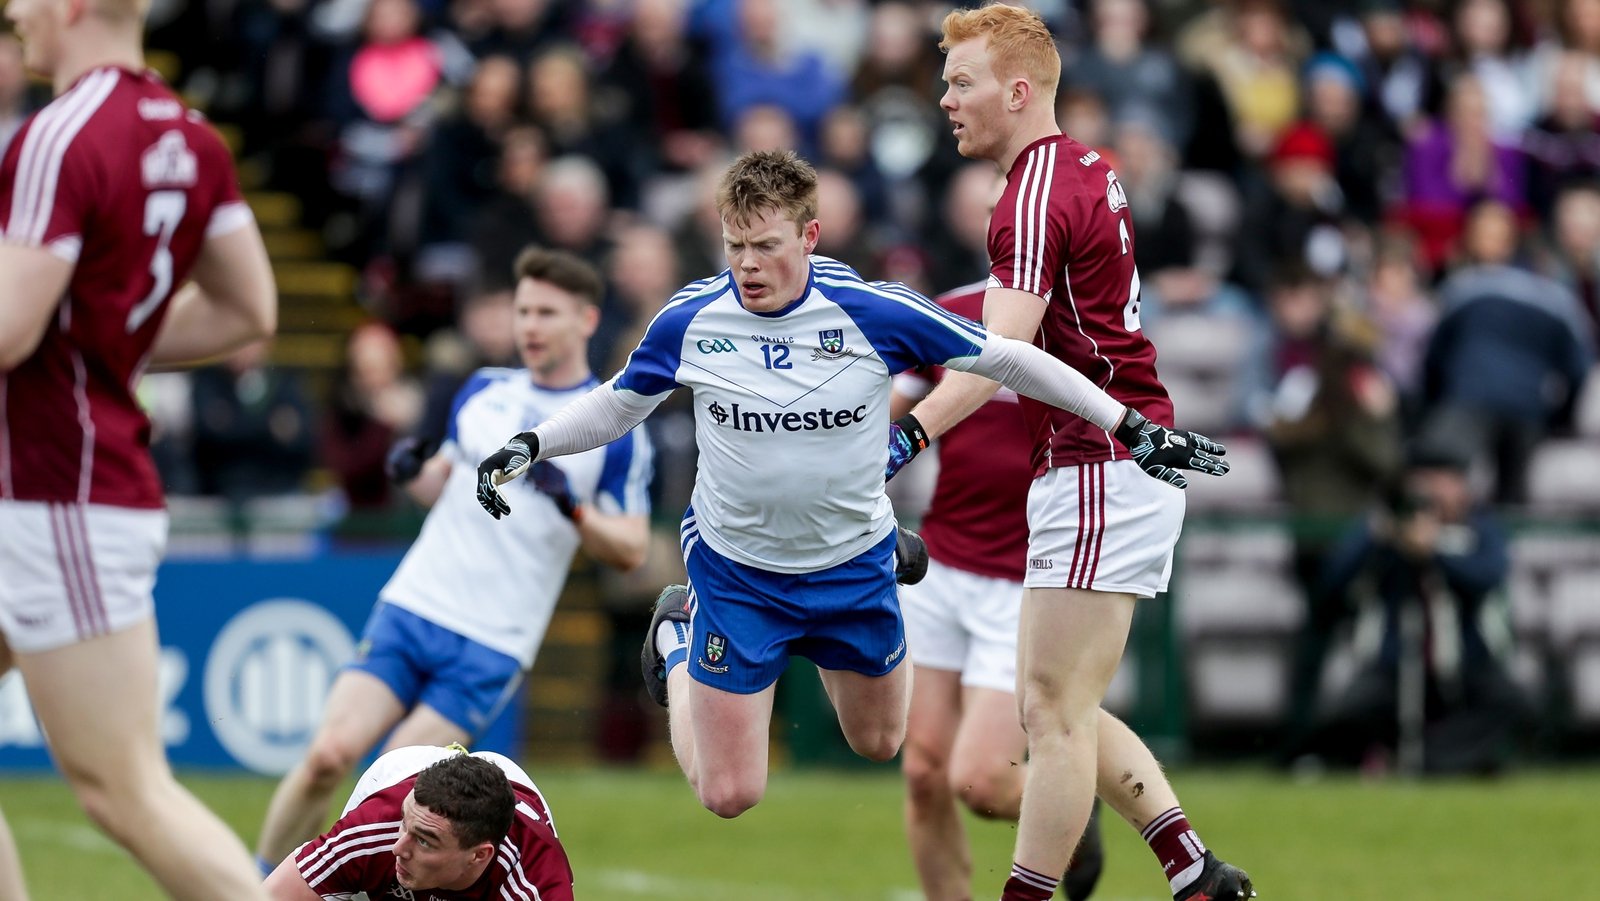 As it happened: Galway v Meath, Donegal v Monaghan 